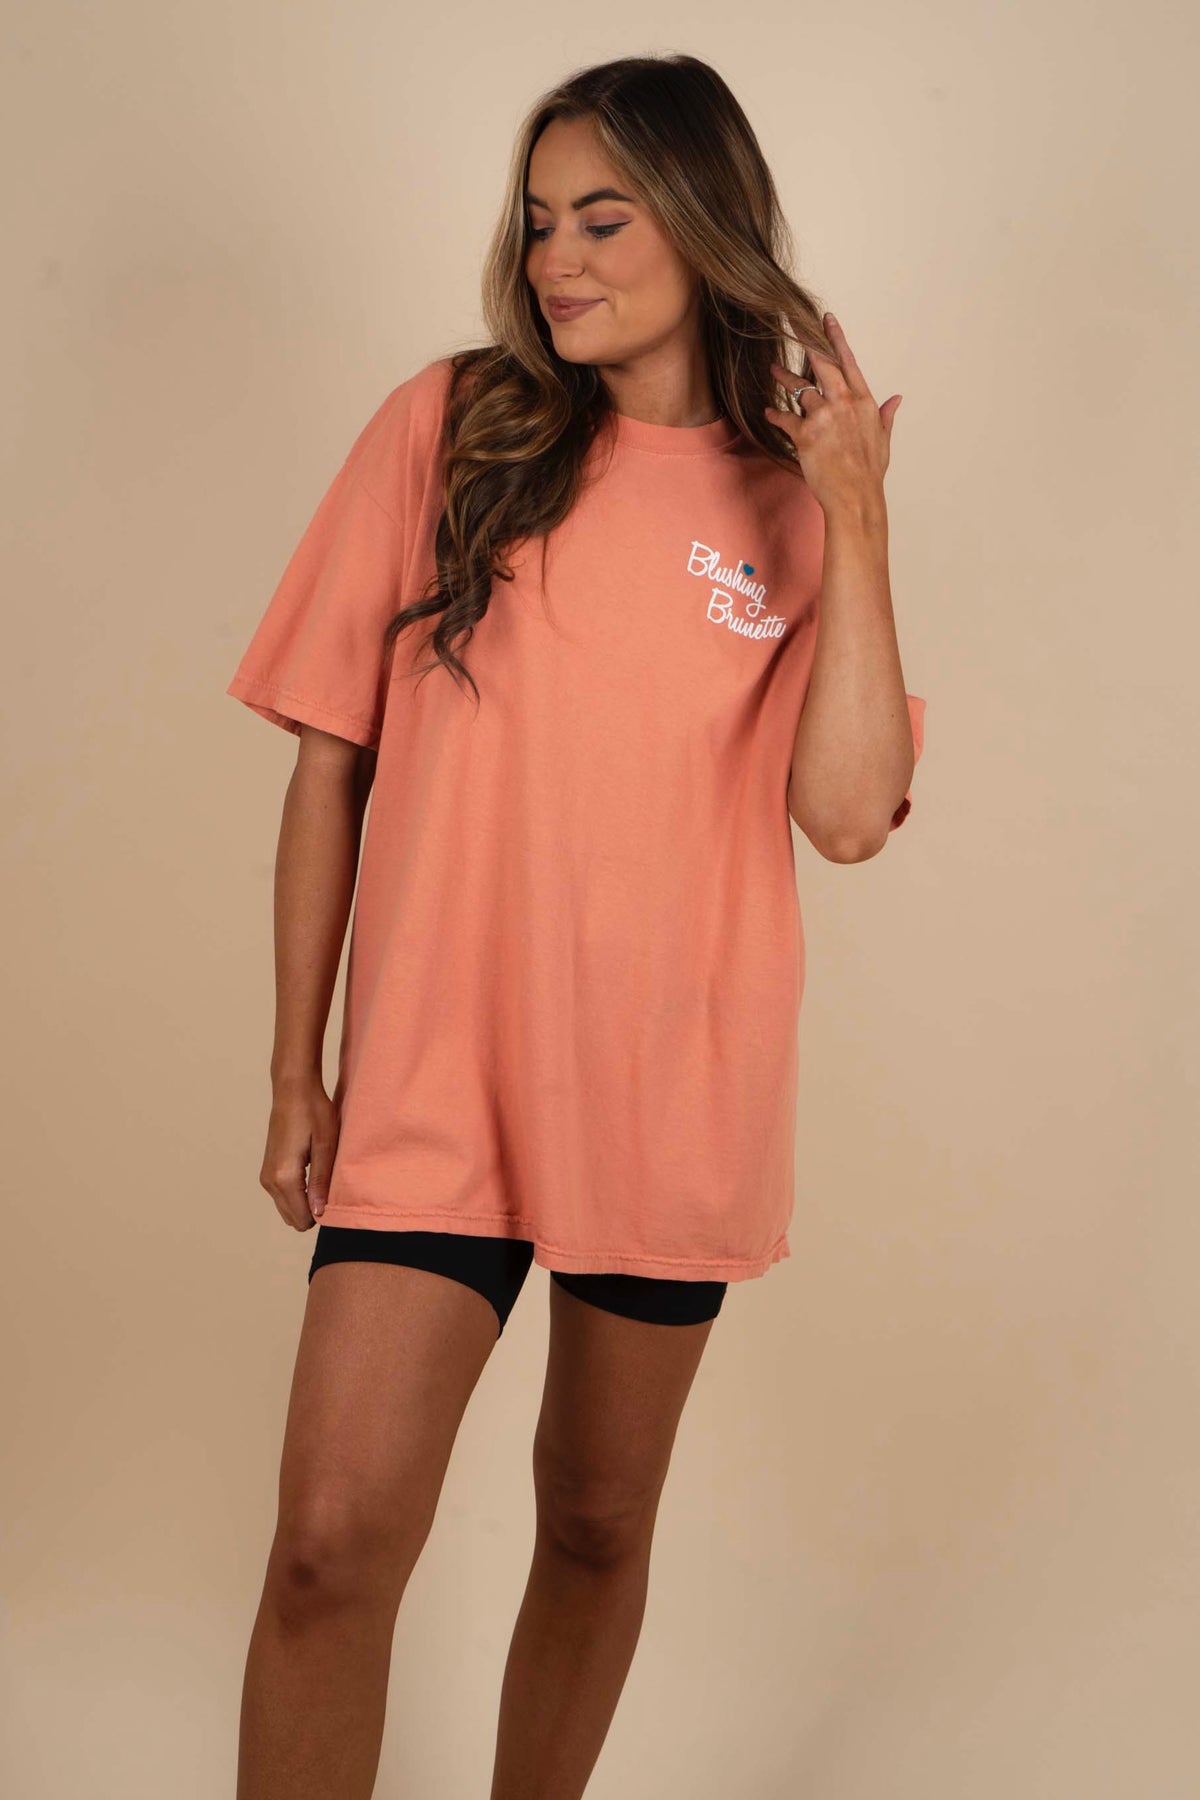 Cute Clothes Are Our Thing Tee